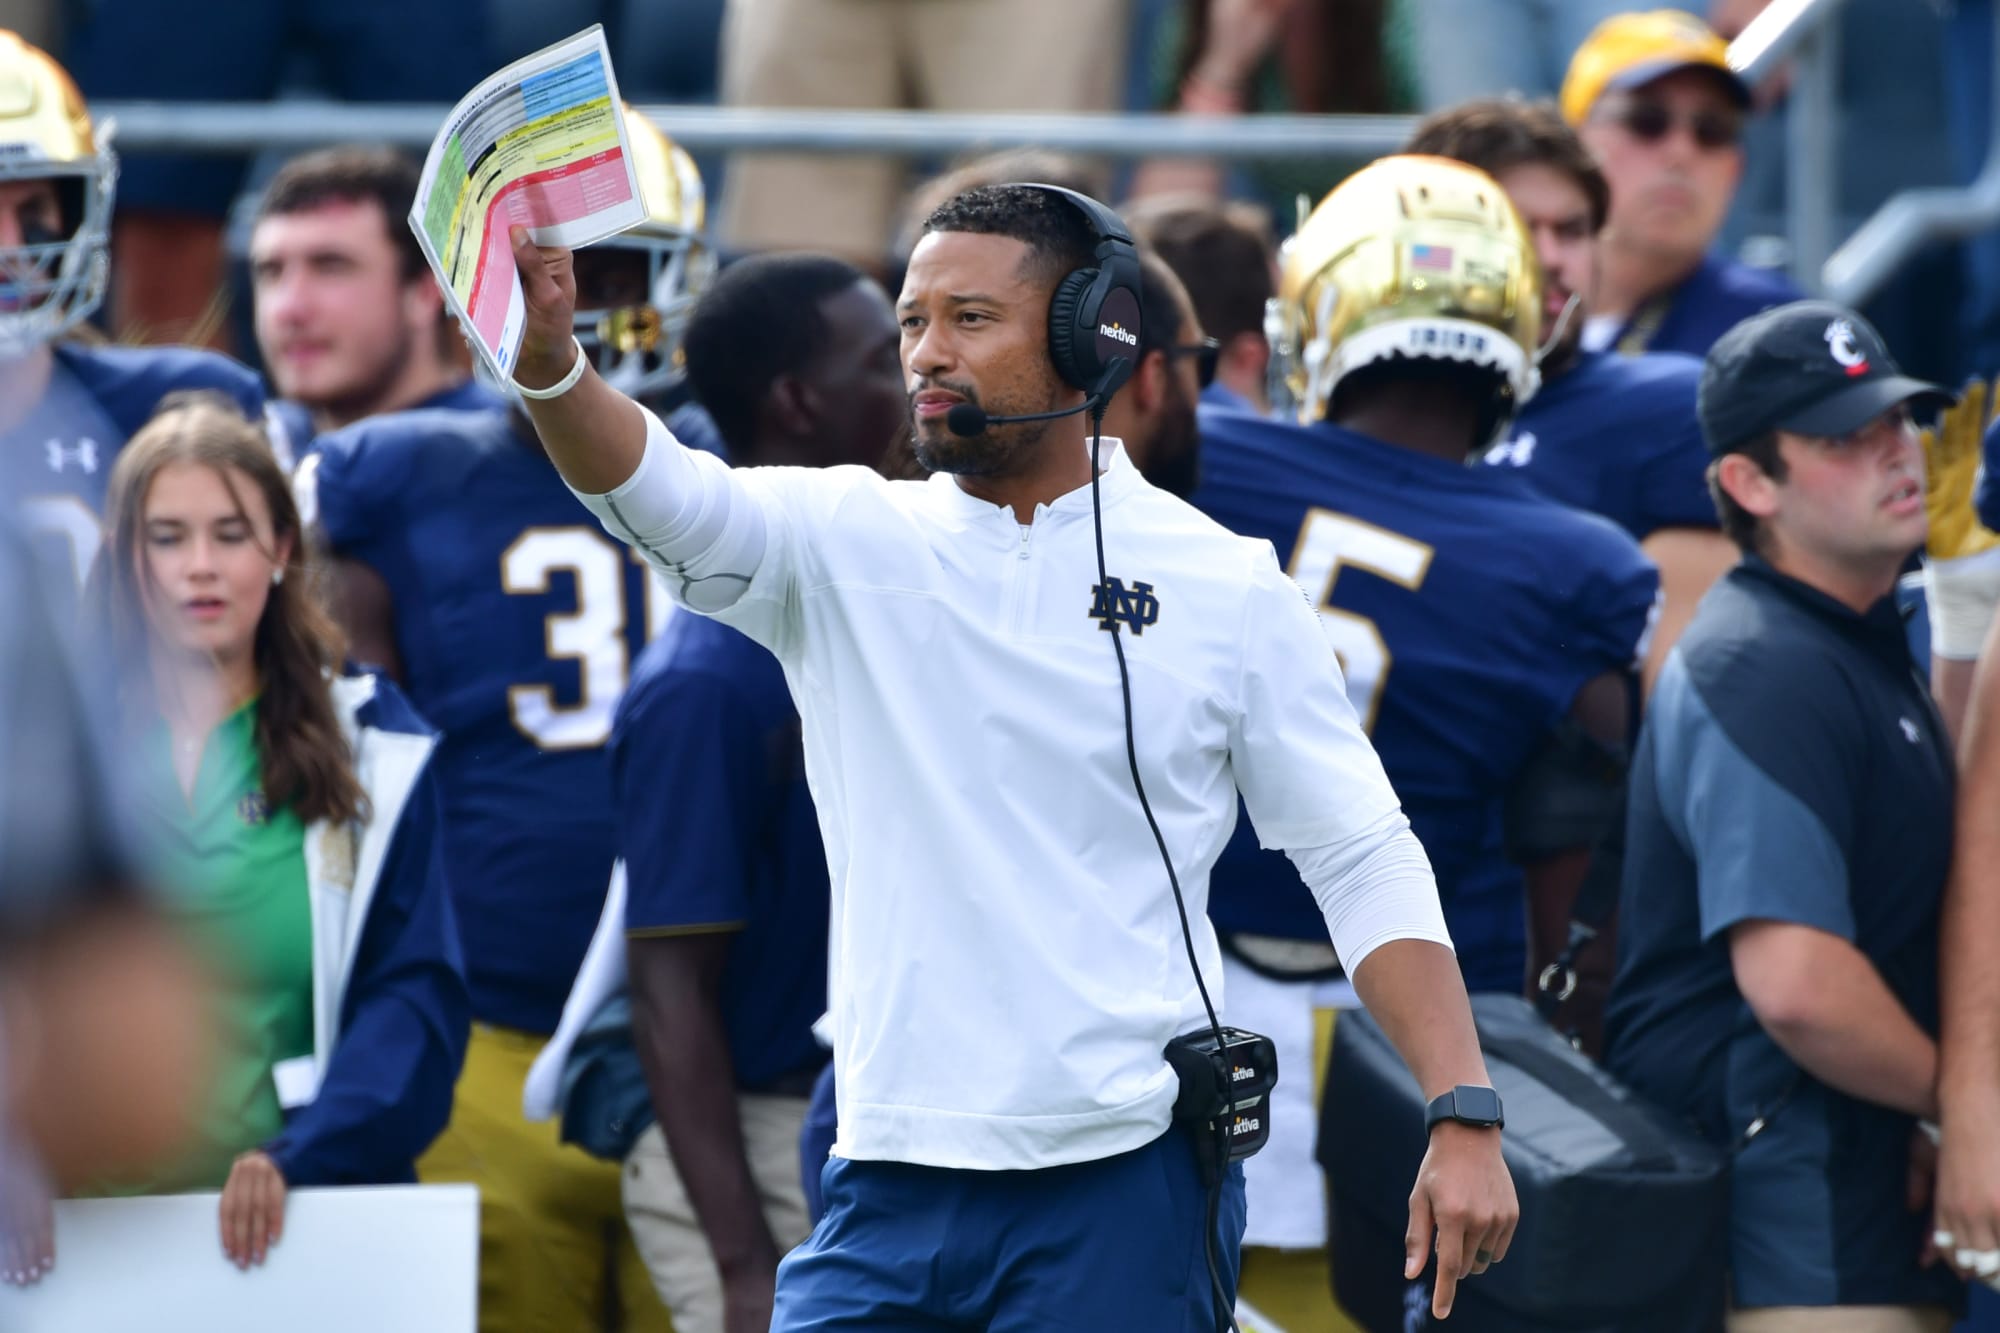 Notre Dame football players, recruits, and alumni backing Marcus Freeman - Slap the Sign